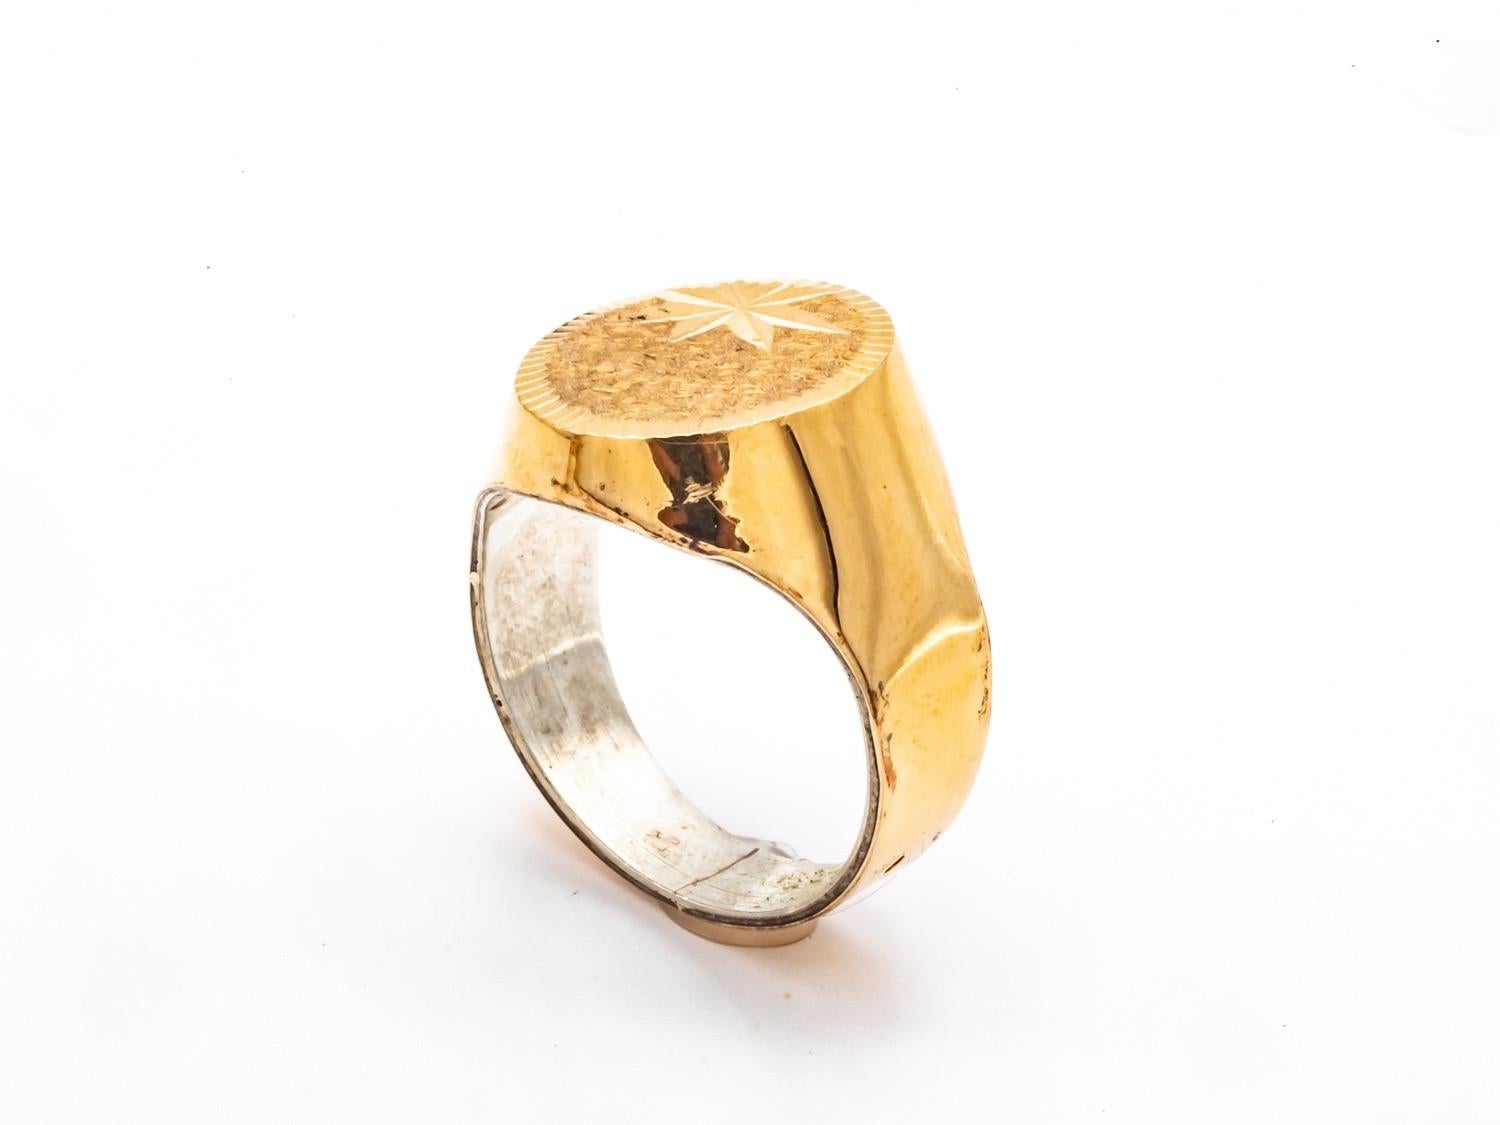 Discover this elegant signet ring in 18-carat gold, adorned with a delicate engraving on the top. This refined piece is designed to capture attention with its timeless design and imposing size.

Crafted in 18-carat gold, this signet ring features a